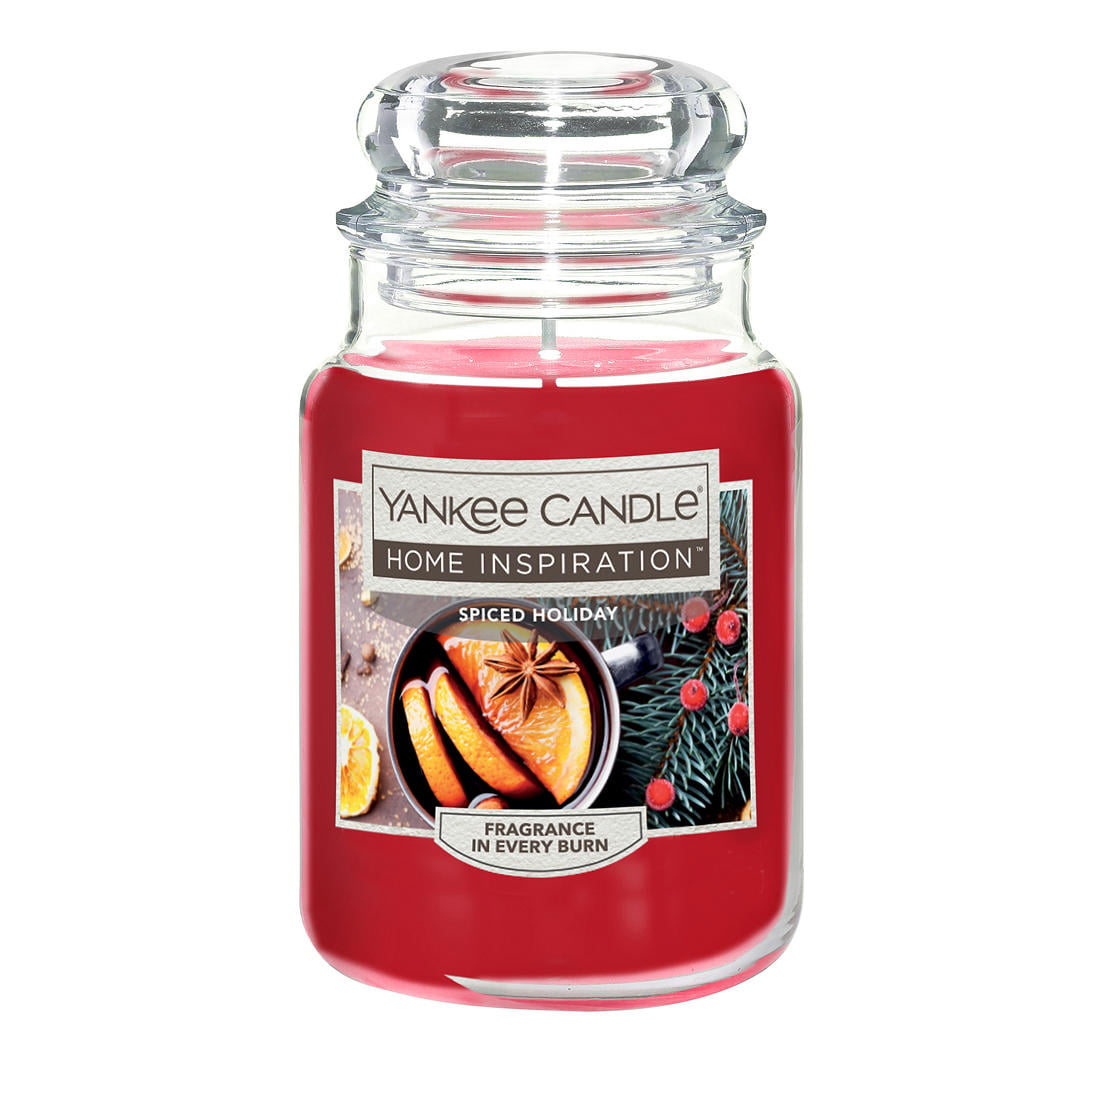 Yankee Candle ROSEBERRY SORBET 22 Oz Jar Candle New 2020 Scent 